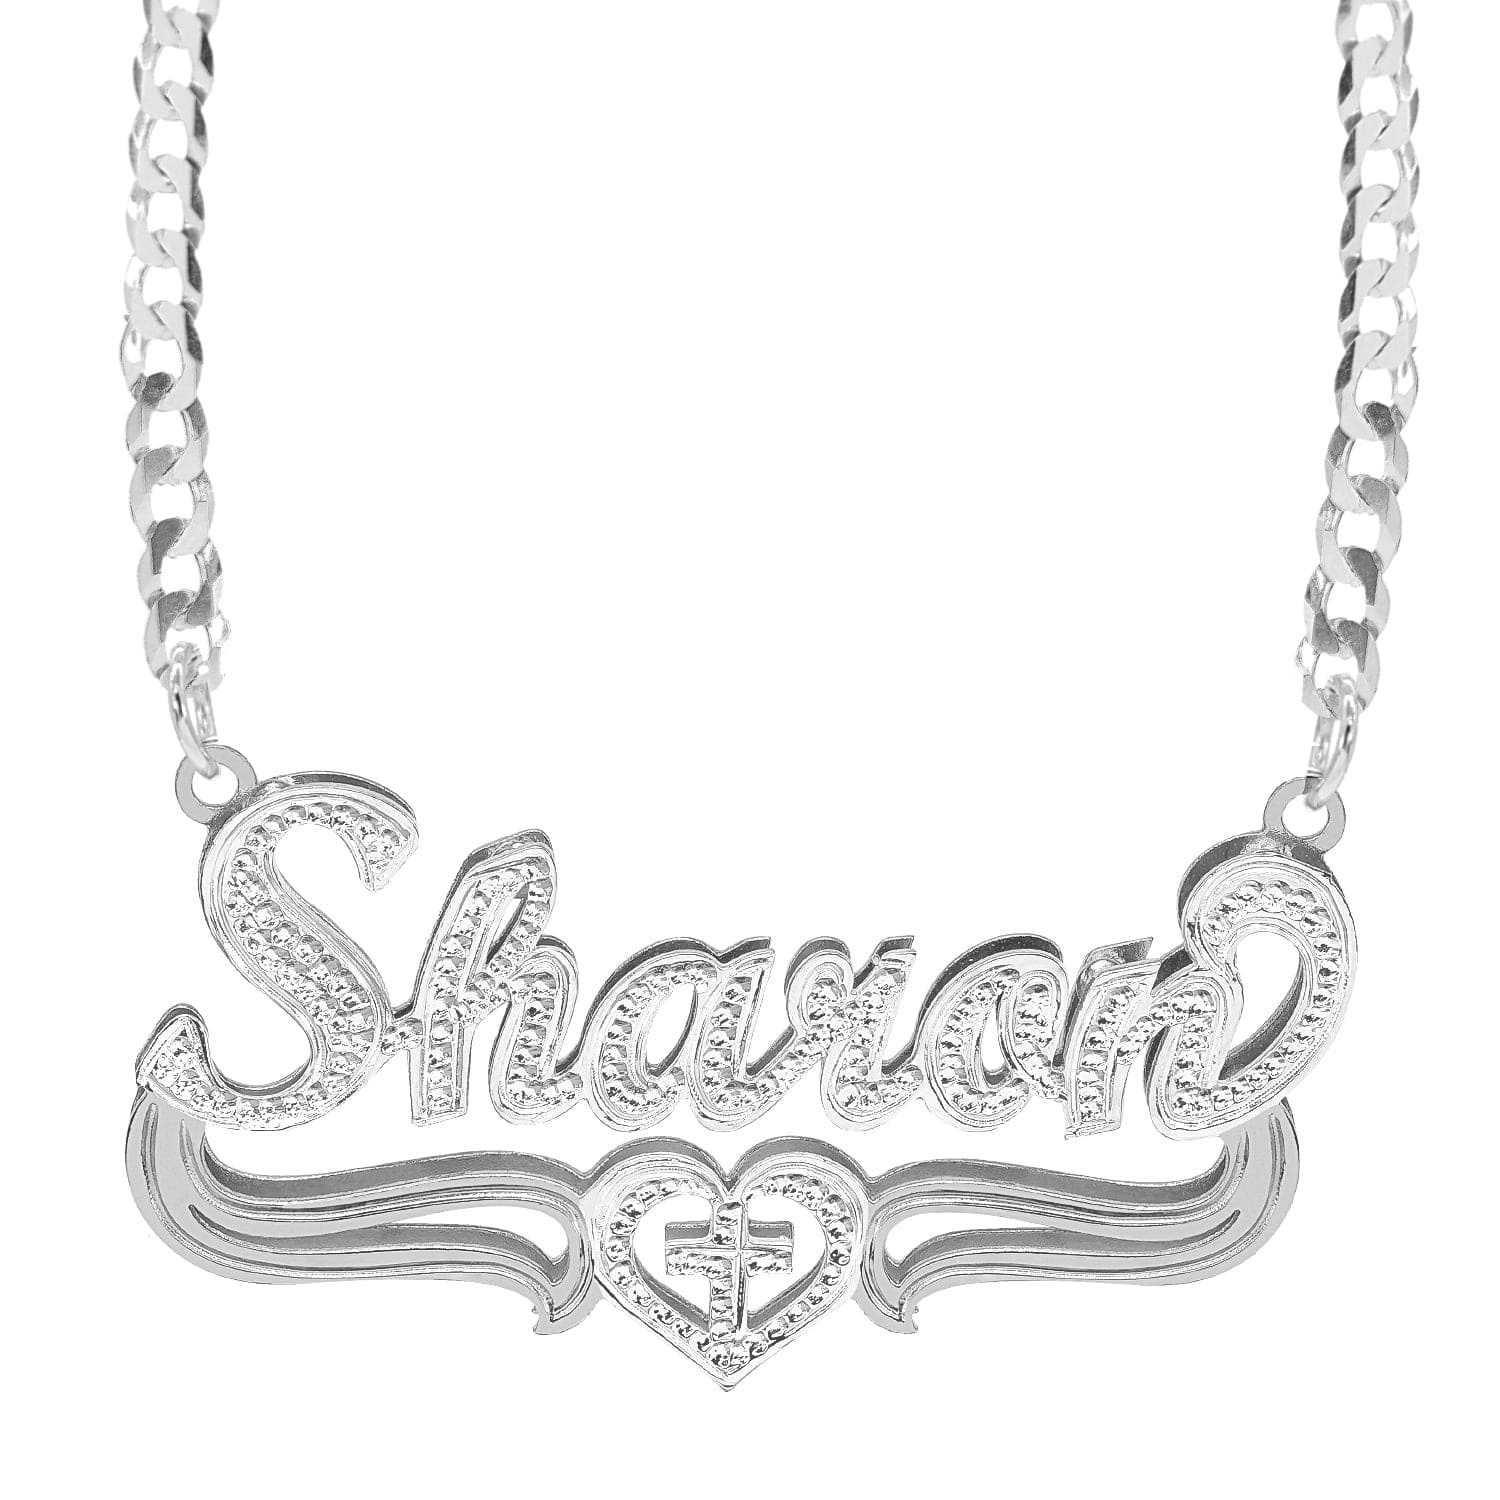 14k Gold over Sterling Silver / Cuban Chain Double Plated Nameplate Necklace "Sharon" with Cuban chain